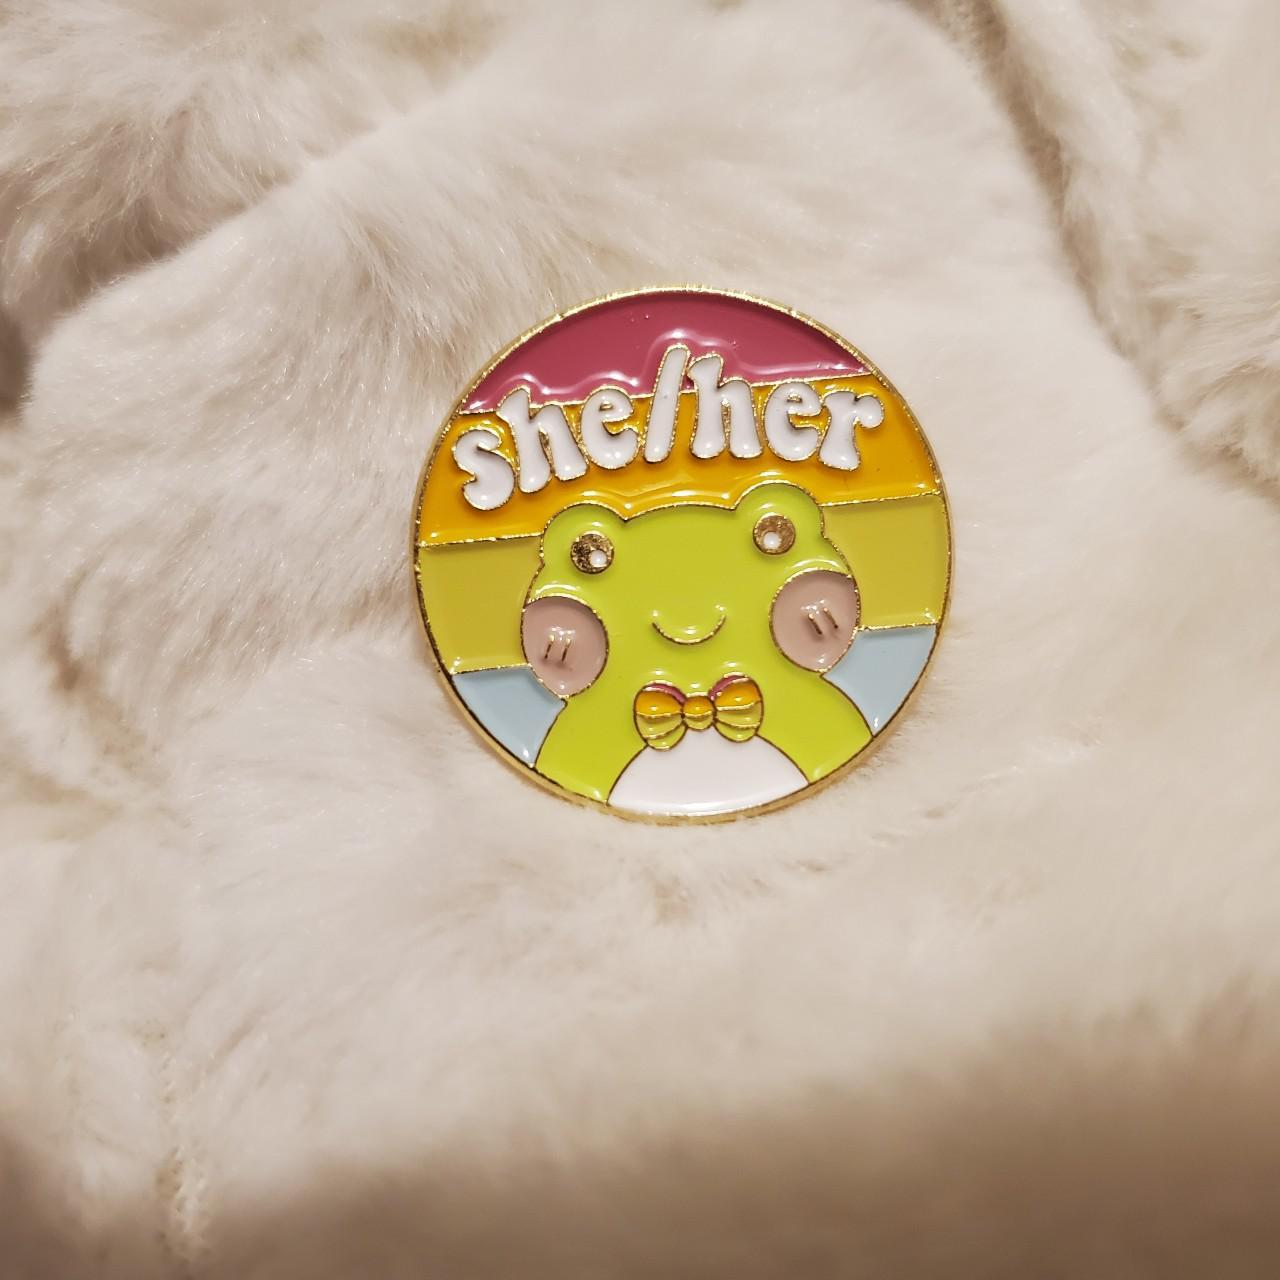 Product Image 1 - She/her frog pronoun pin!

#she #her